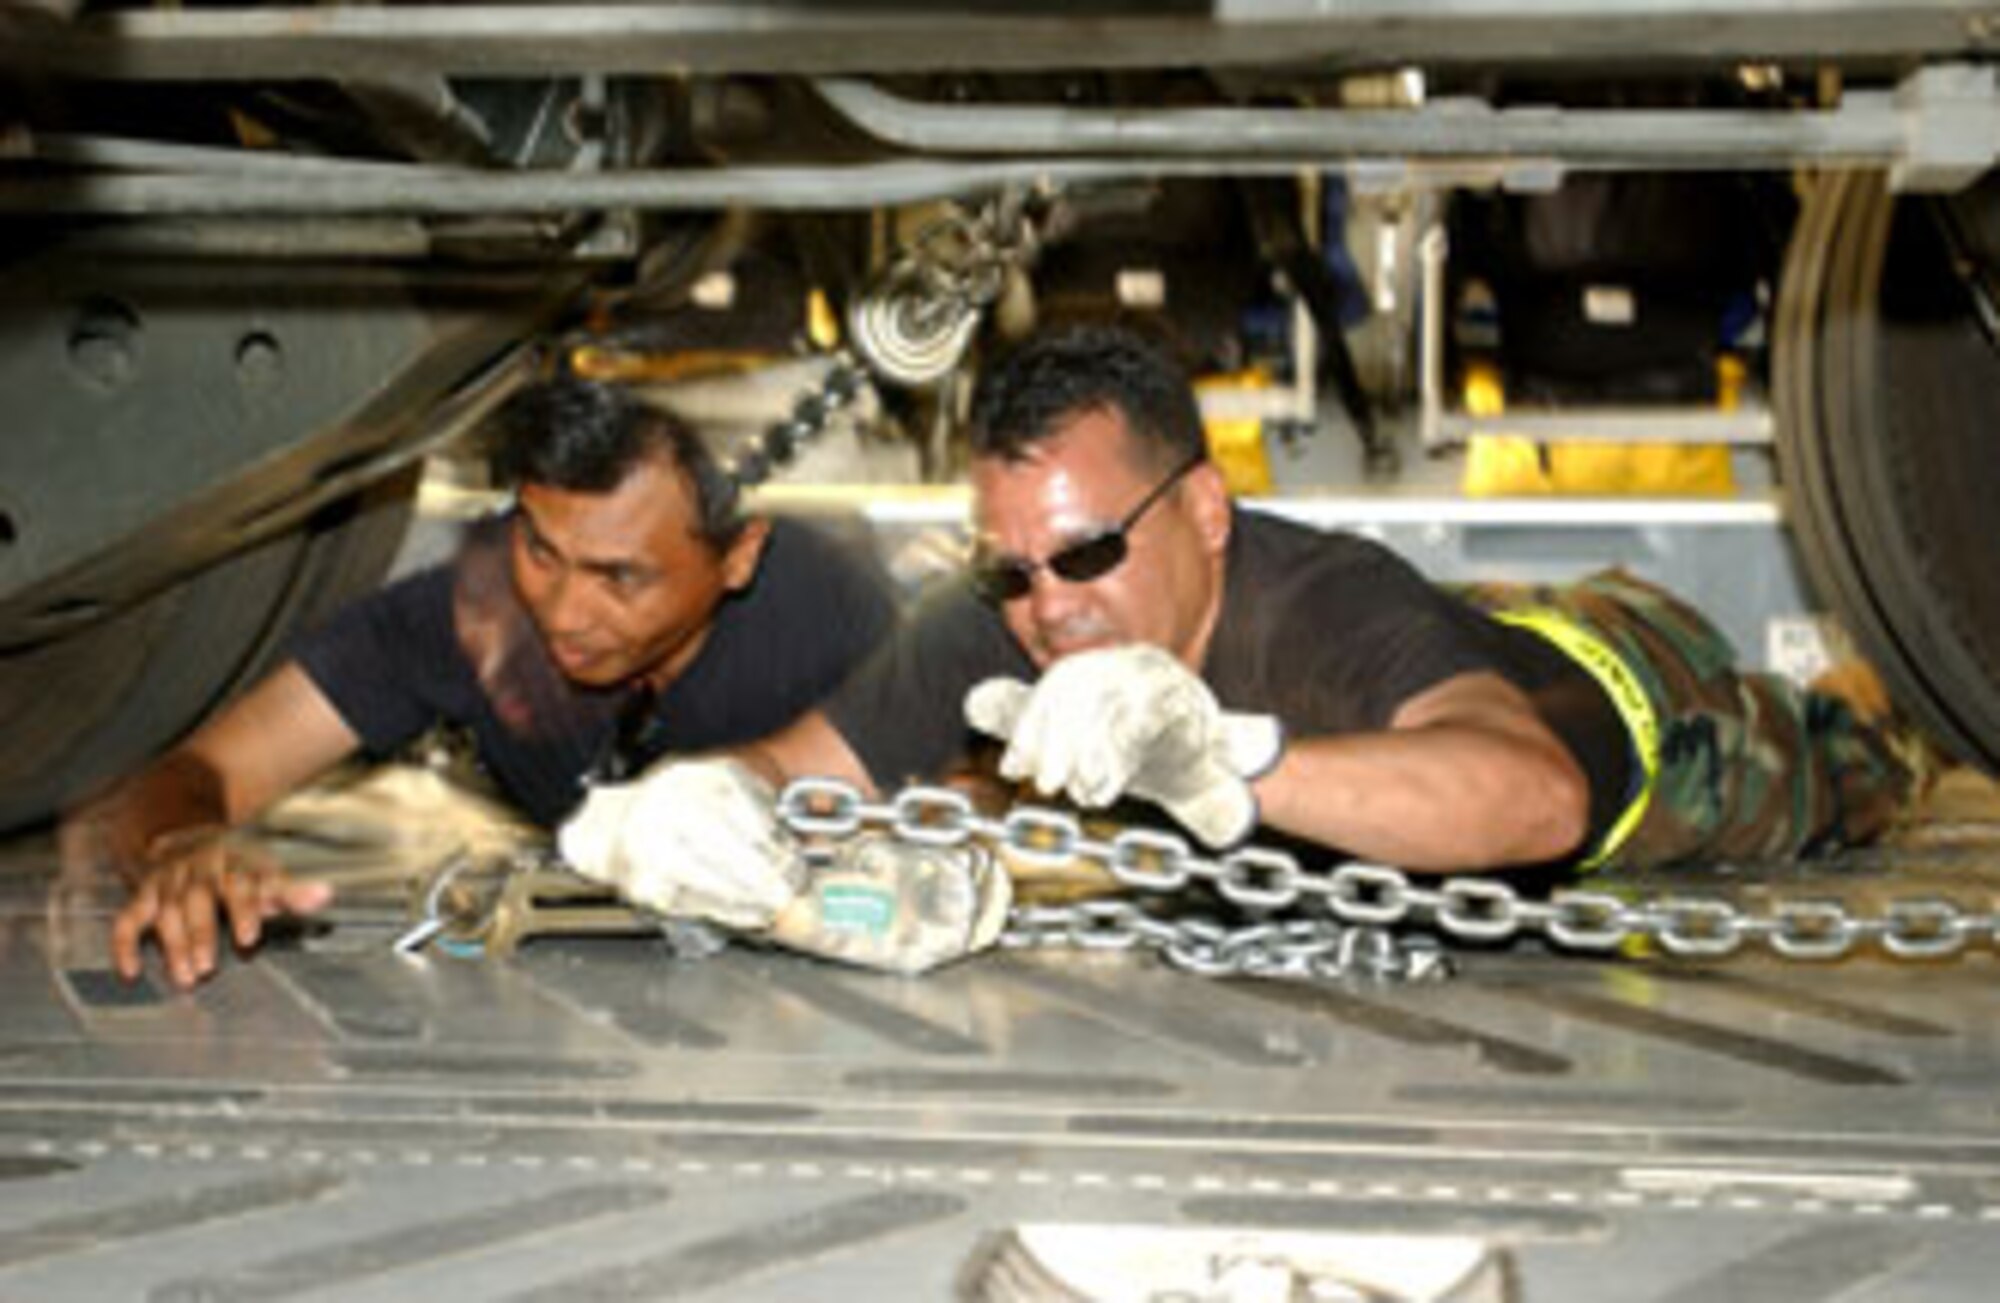 Senior Airman Frederick Eleazar and Senior Airman Kyle Orian, 50th Aerial Port Squadron, tighten down chains to secure a 60k Tunner on a  C-17 Globemaster III at March during Patriot Hook.
U.S. Air Force photo by Senior Airman Sarah N. Sutliff